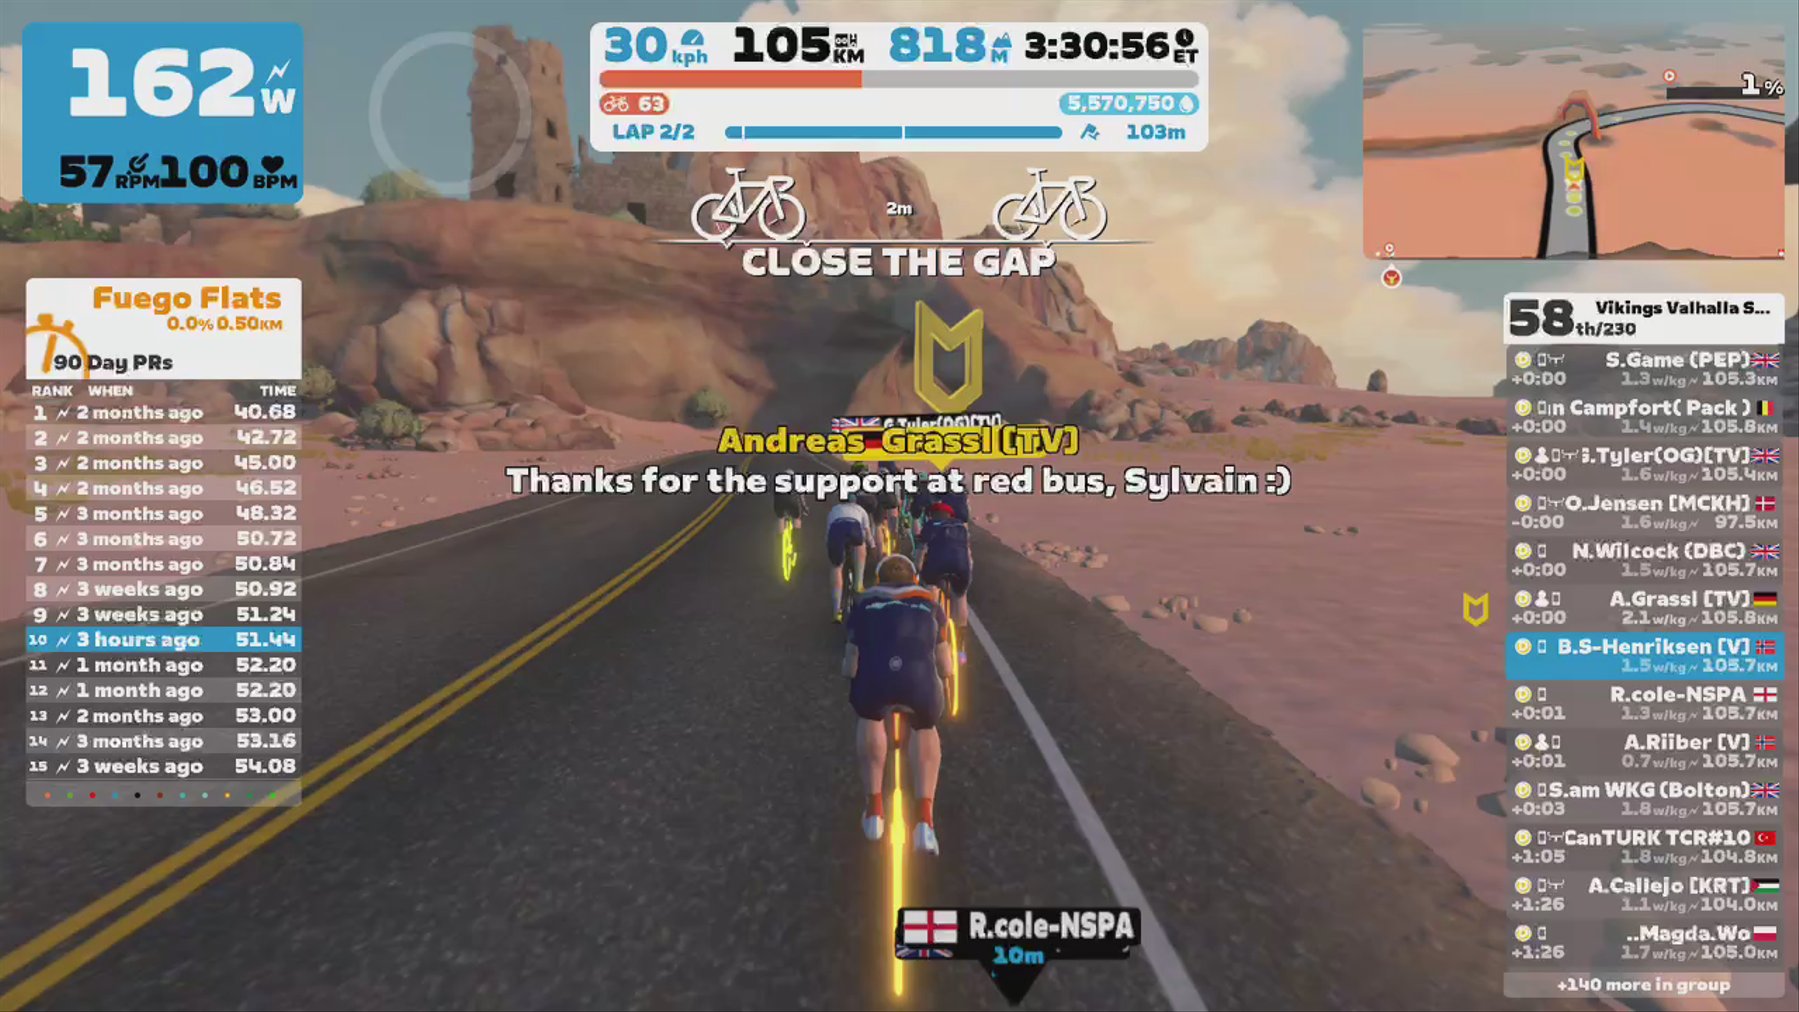 Zwift - Group Ride: Vikings Valhalla Sunday Skaal ride (D) on Eastern Eight in Watopia